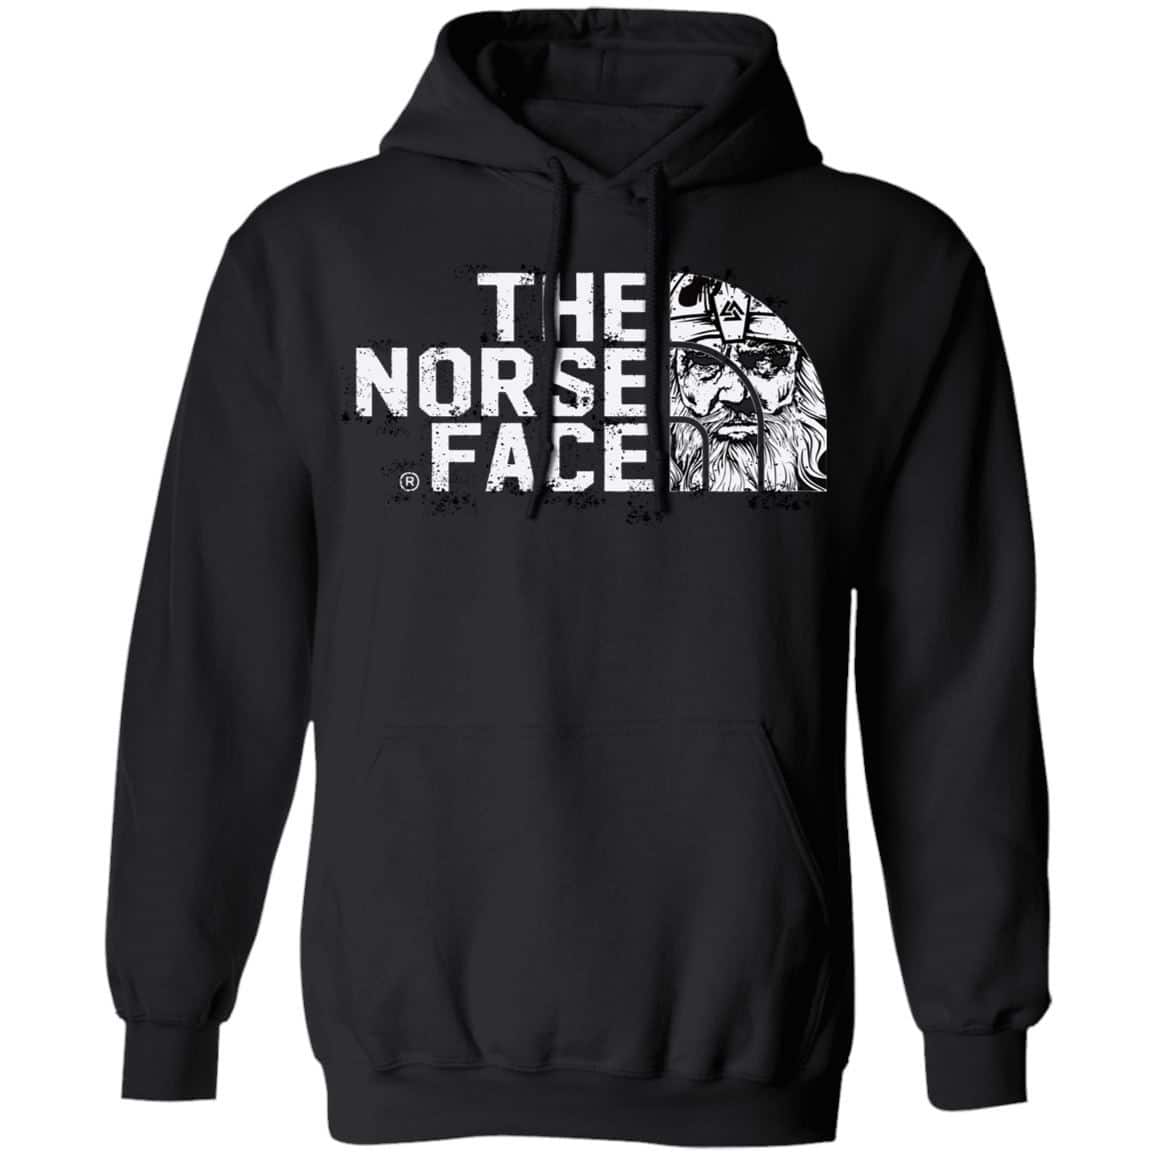 Viking apparel, The norse face, Front - AAF Store NY